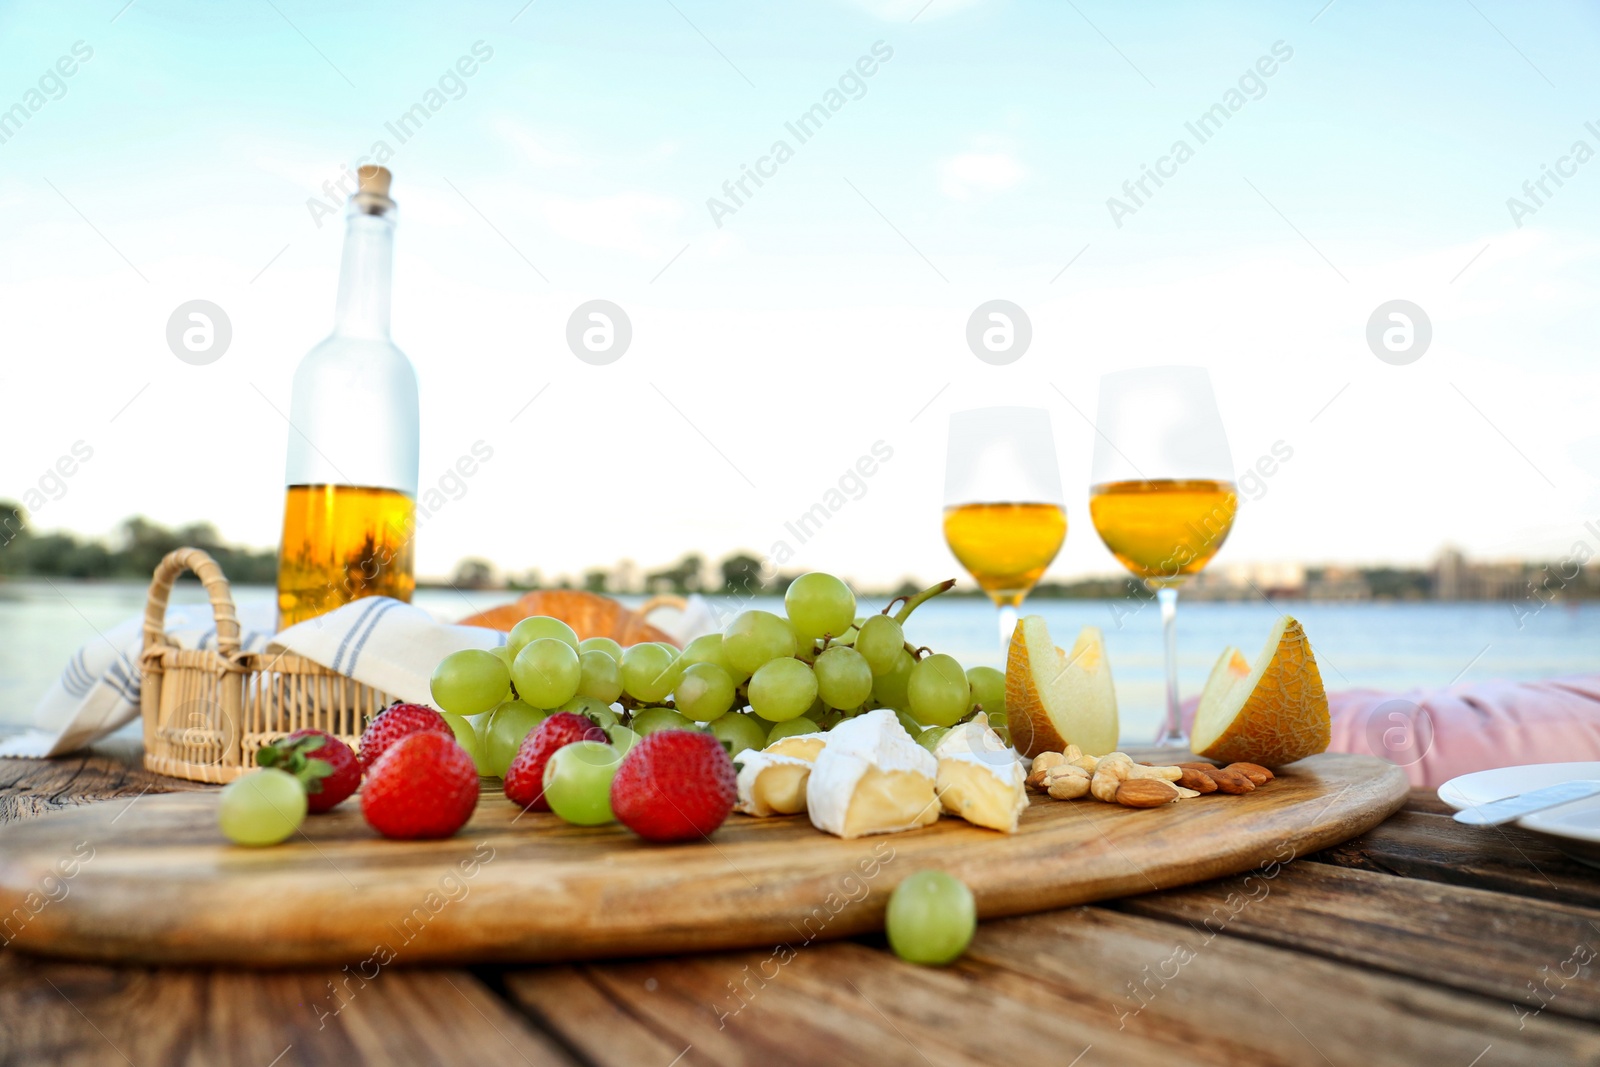 Photo of Food for picnic and white wine served on wooden pallet near river